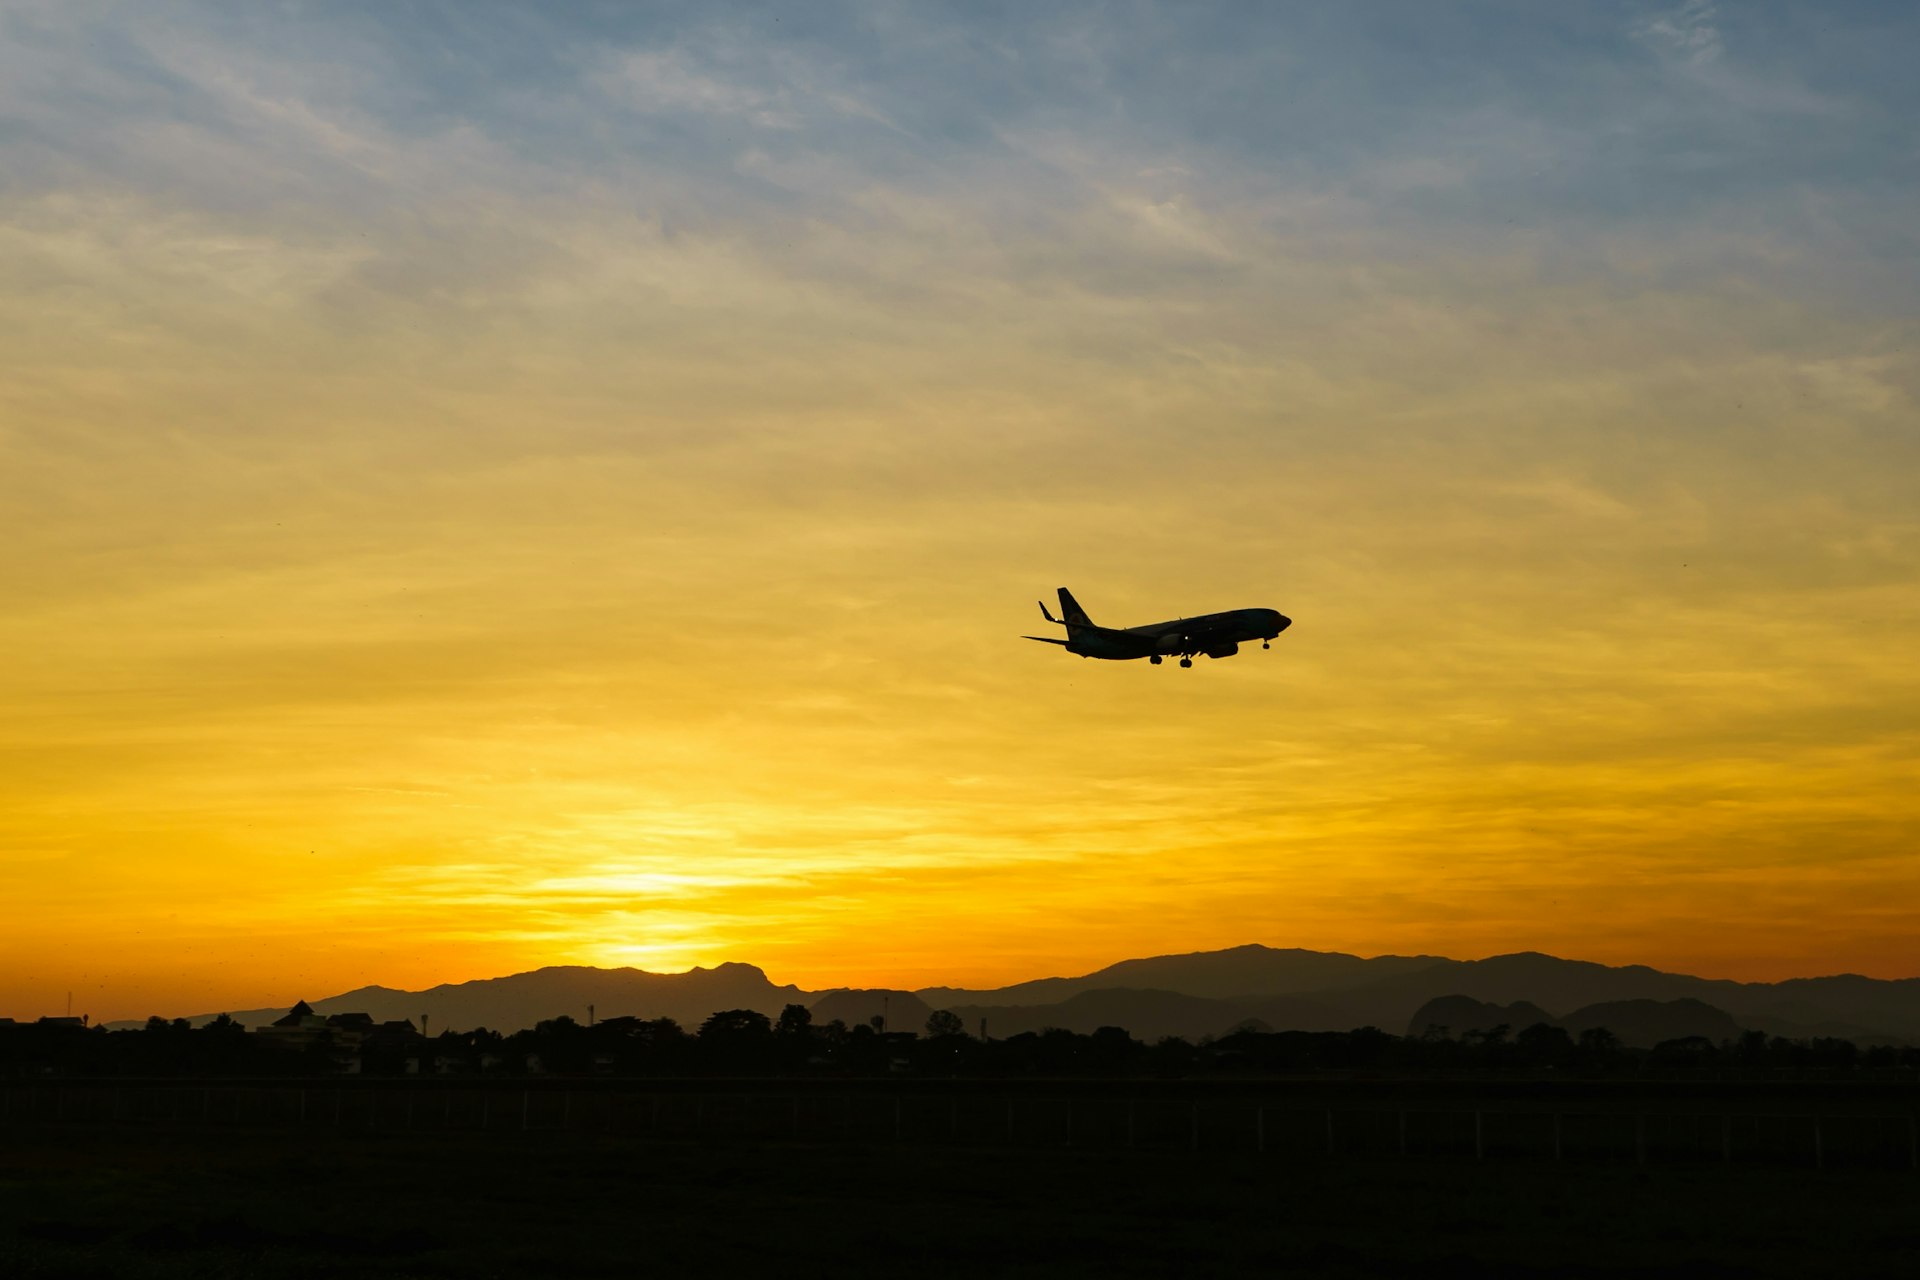 Silhouette of a plane in the air at sunset